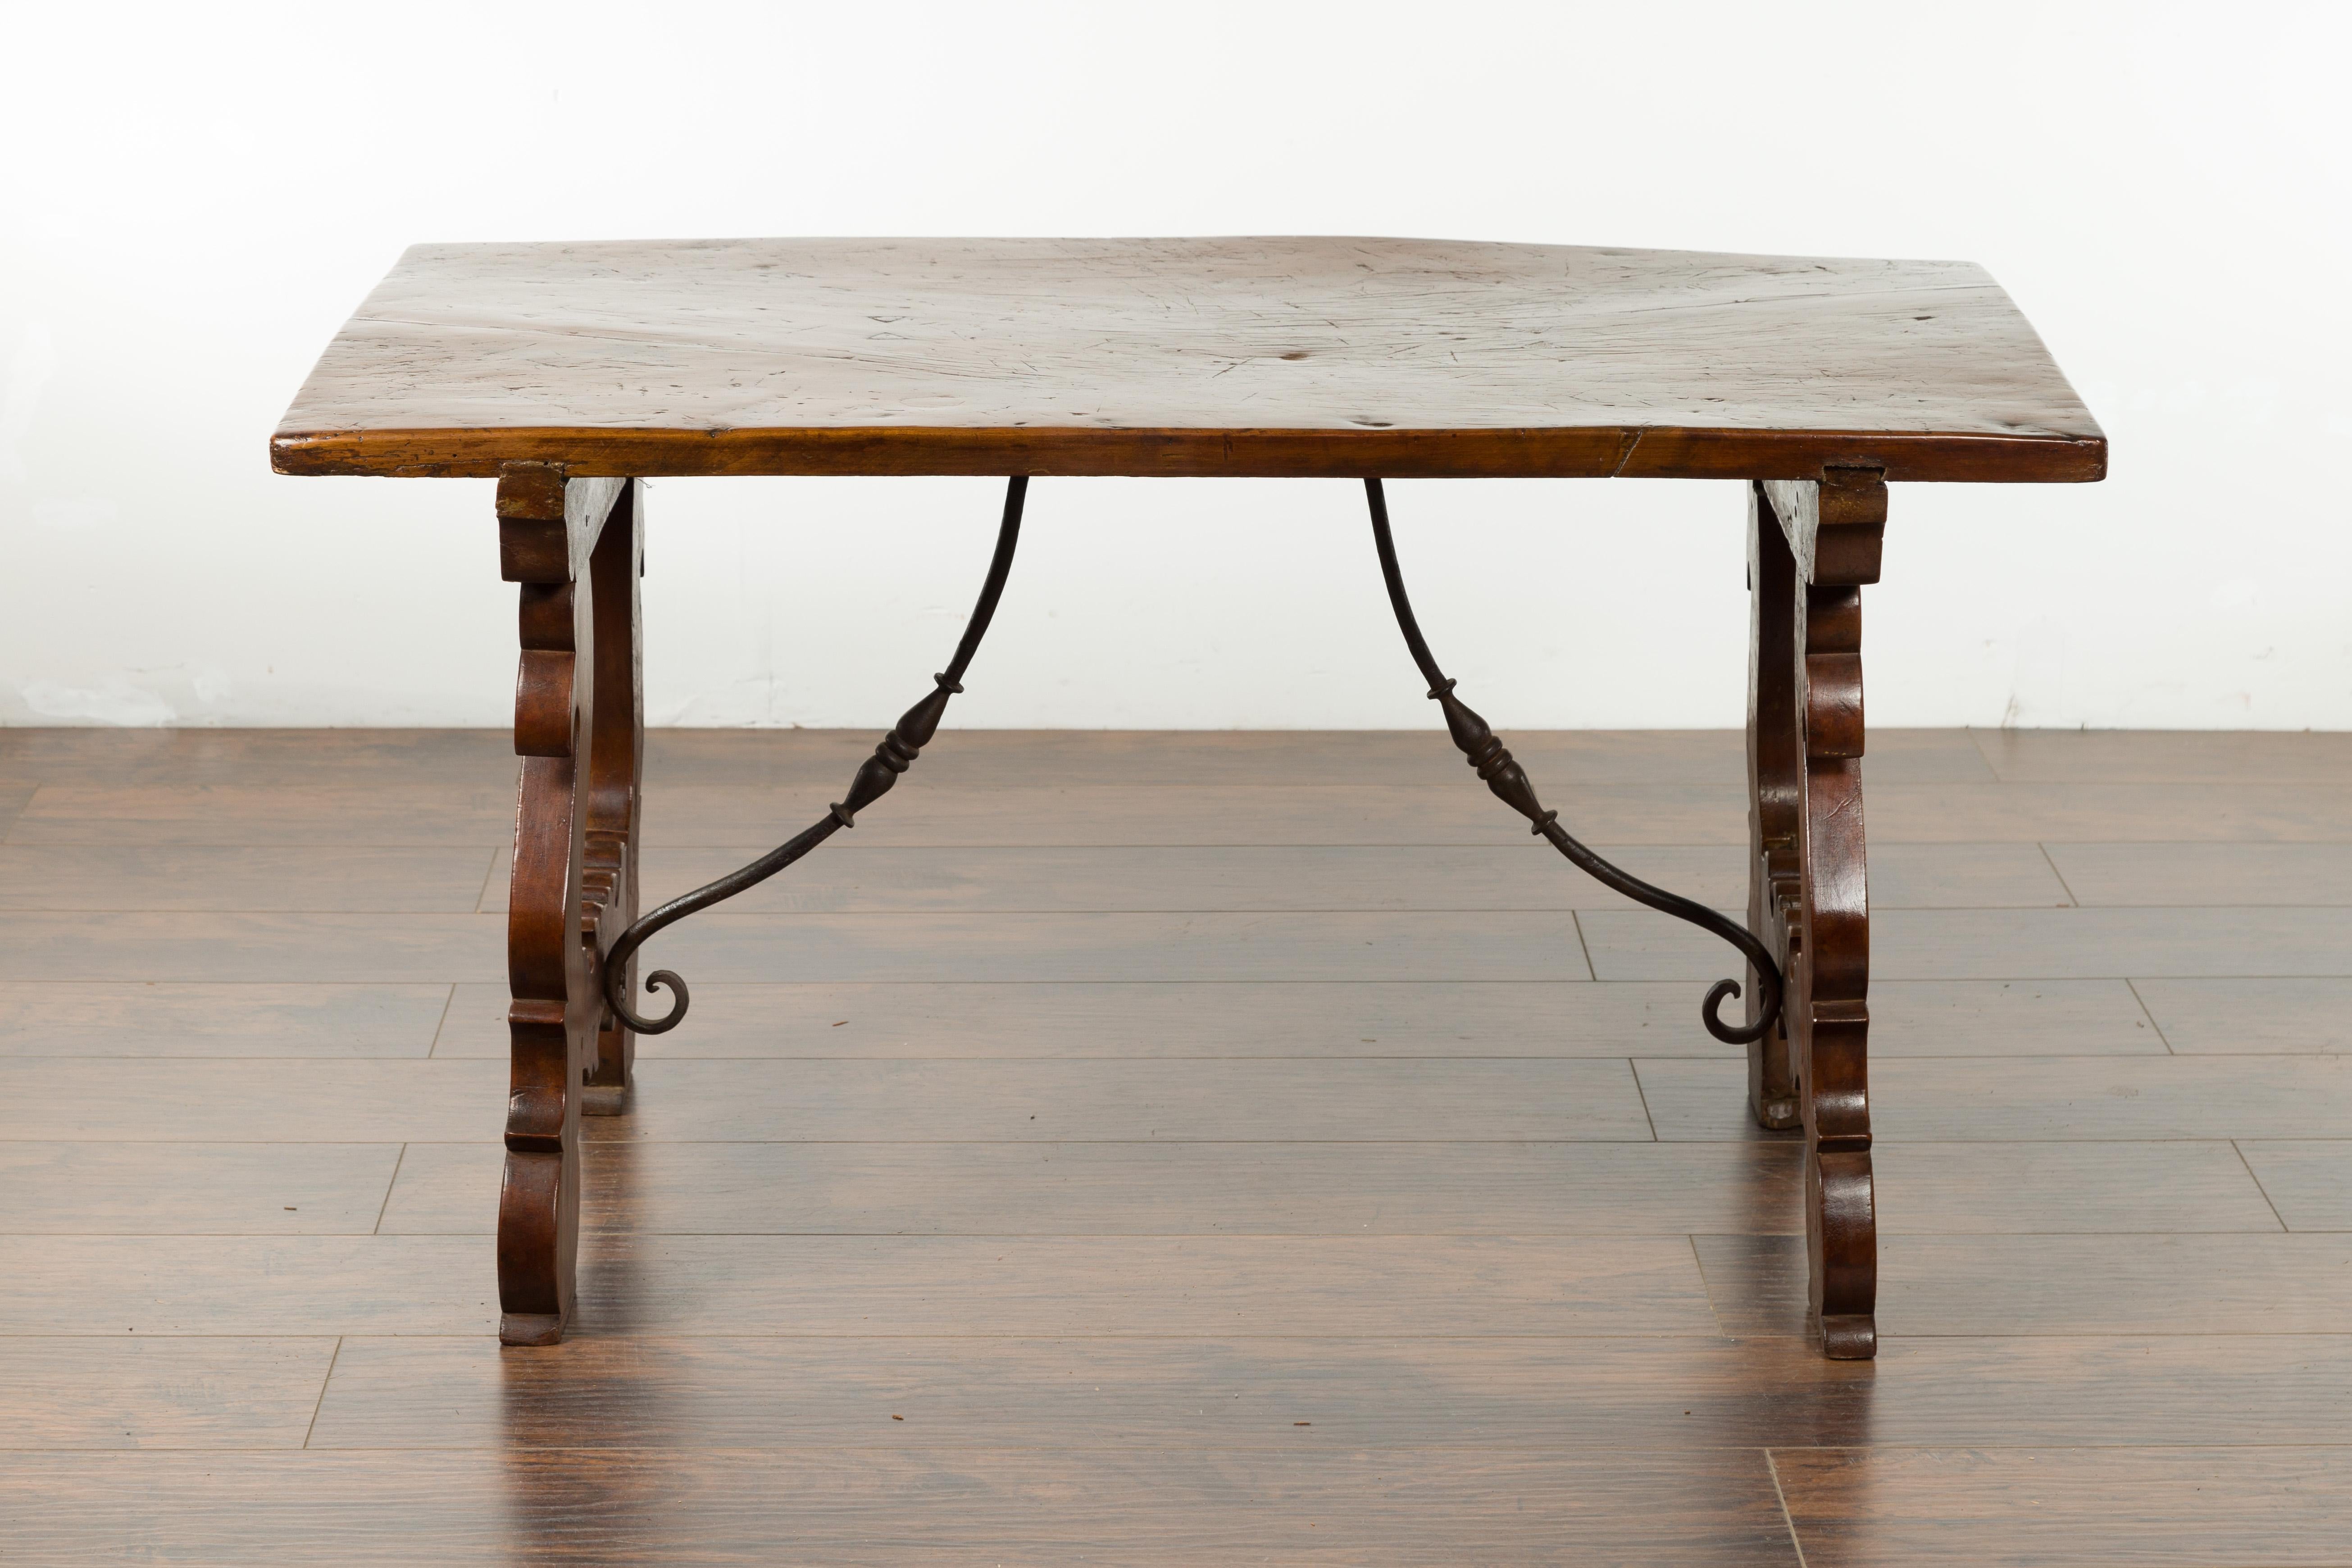 Italian 1820s Walnut Low Fratino Table with Lyre-Shaped Base and Iron Stretchers In Good Condition For Sale In Atlanta, GA